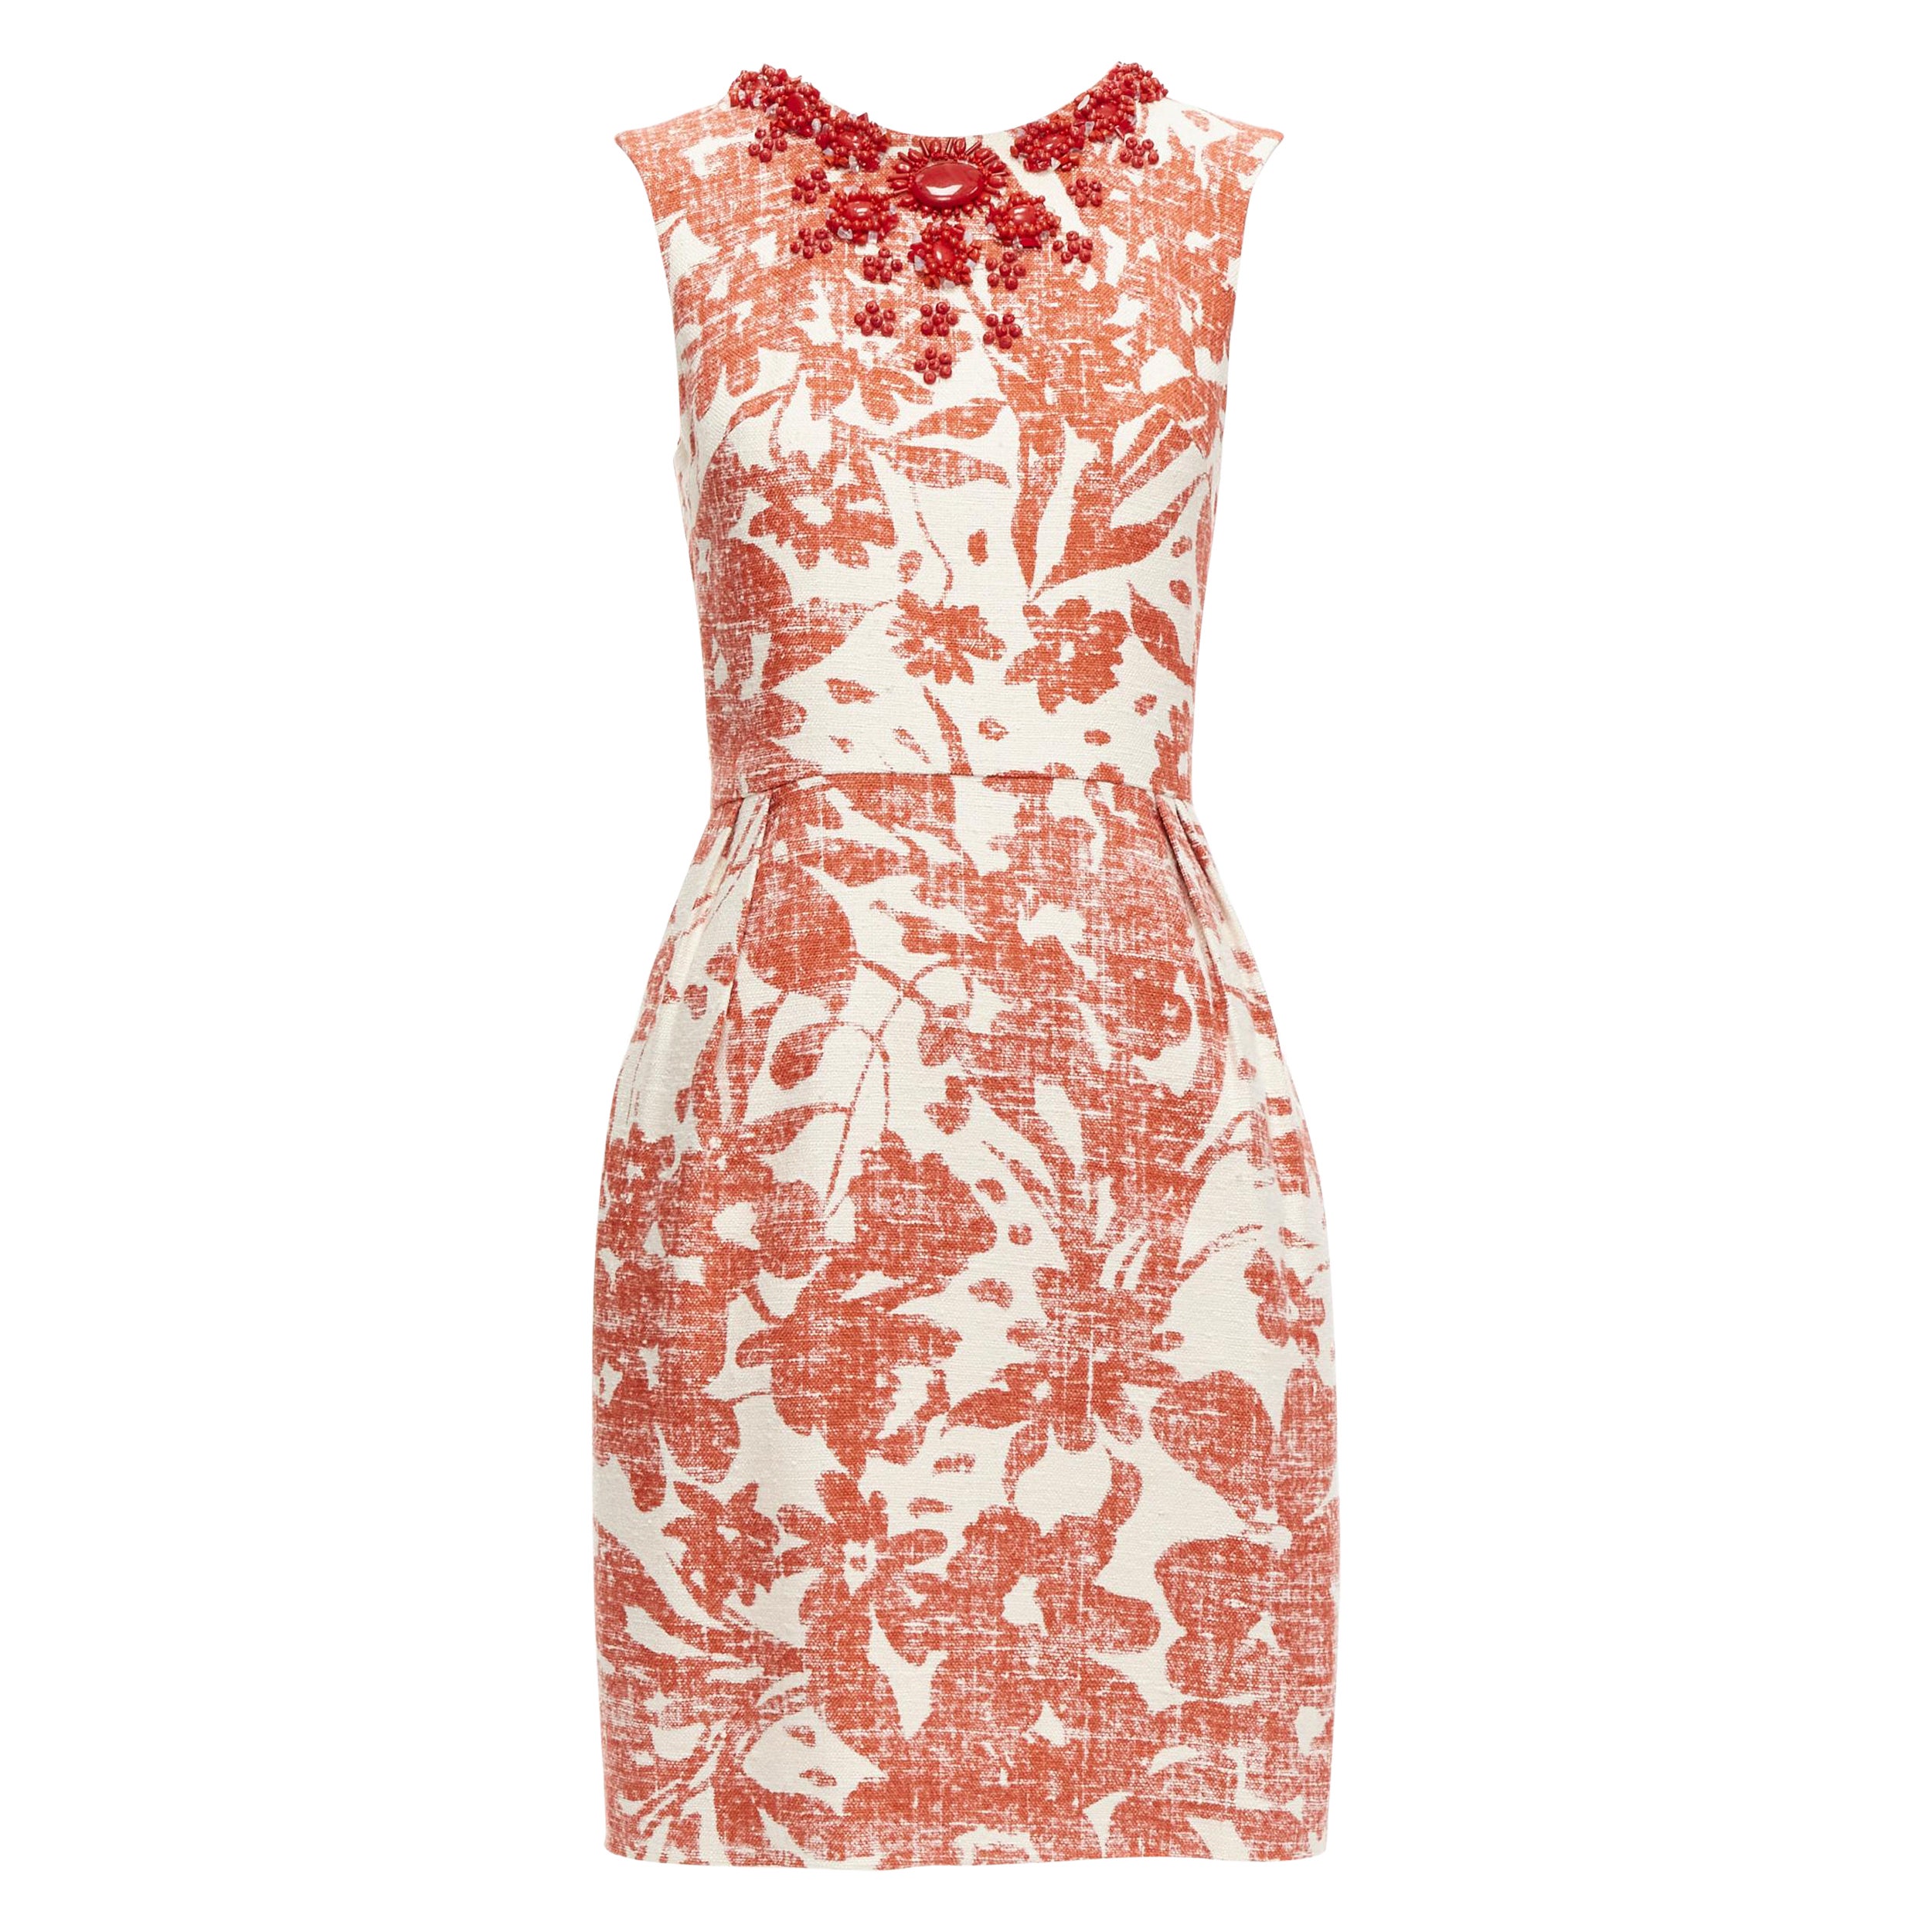 MONIQUE LHUILLIER cream red floral embellished collar sheath dress For Sale